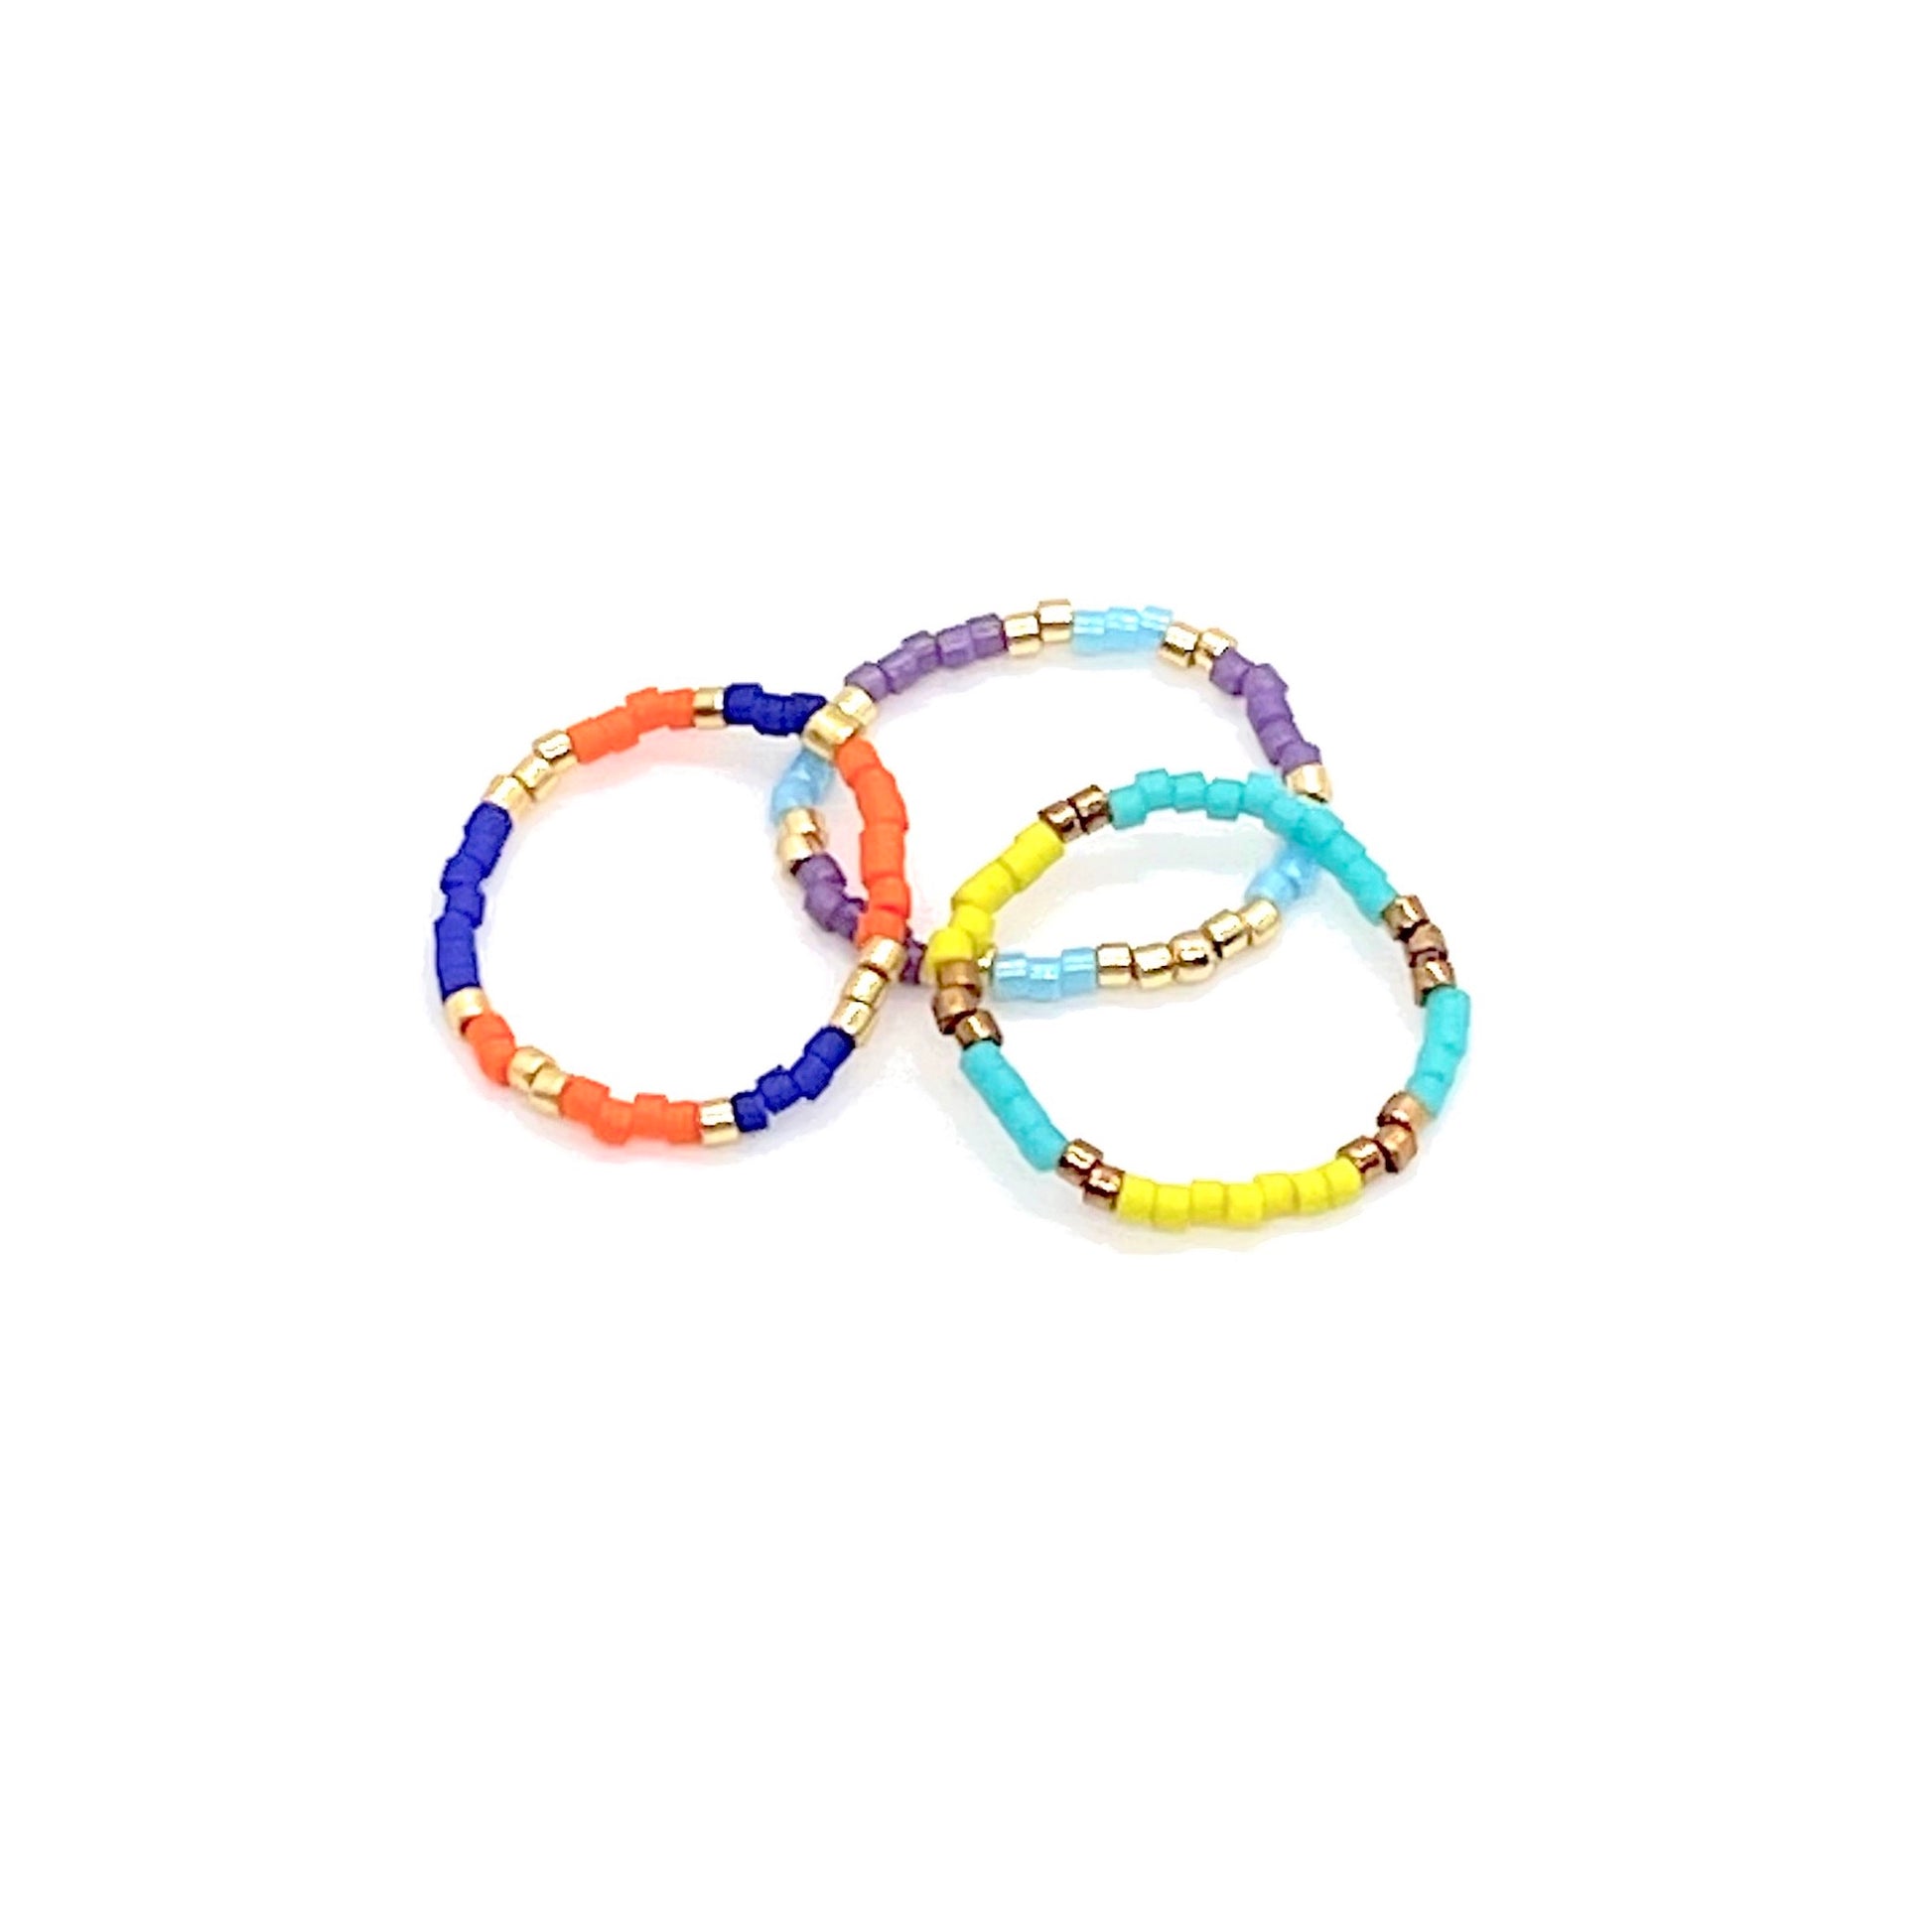 Beaded stretch ring set of 3 with color blocks of purple, blue, orange, yellow, and metal-tone Miyuki Delica seed beads.